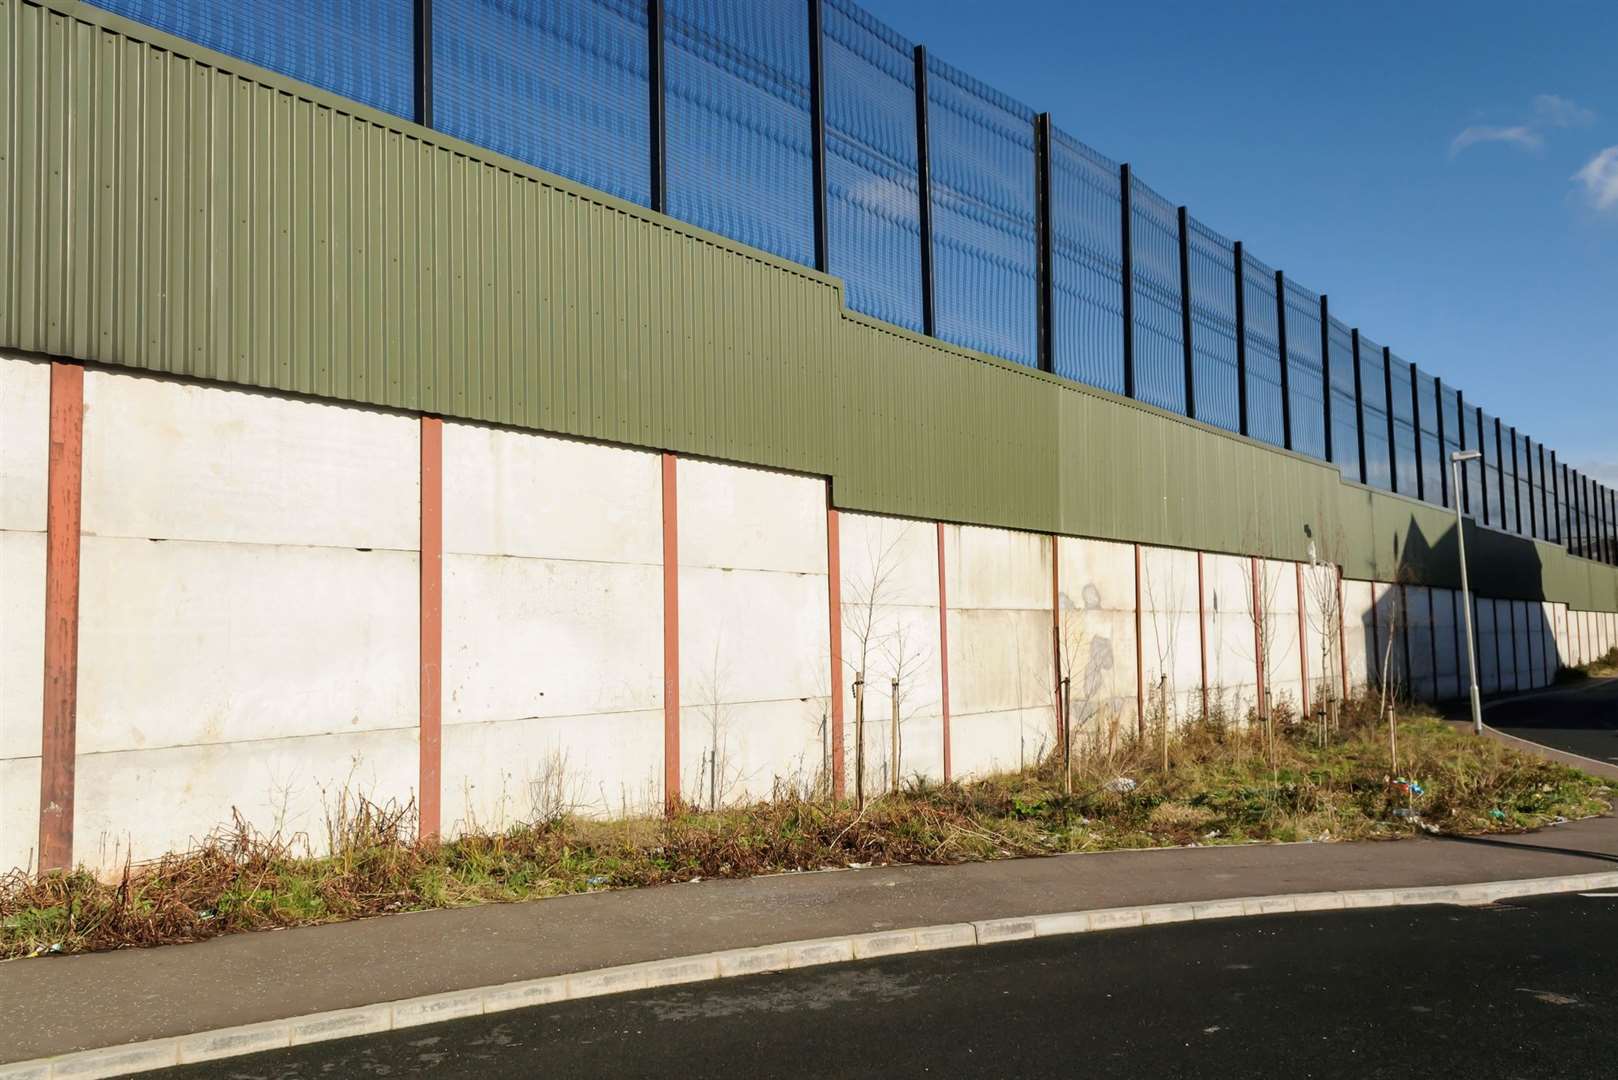 A "peace wall" in Belfast, Northern Ireland, which was erected to divide Roman Catholic and Protestant communities. Picture: iStock/Stephen Barnes